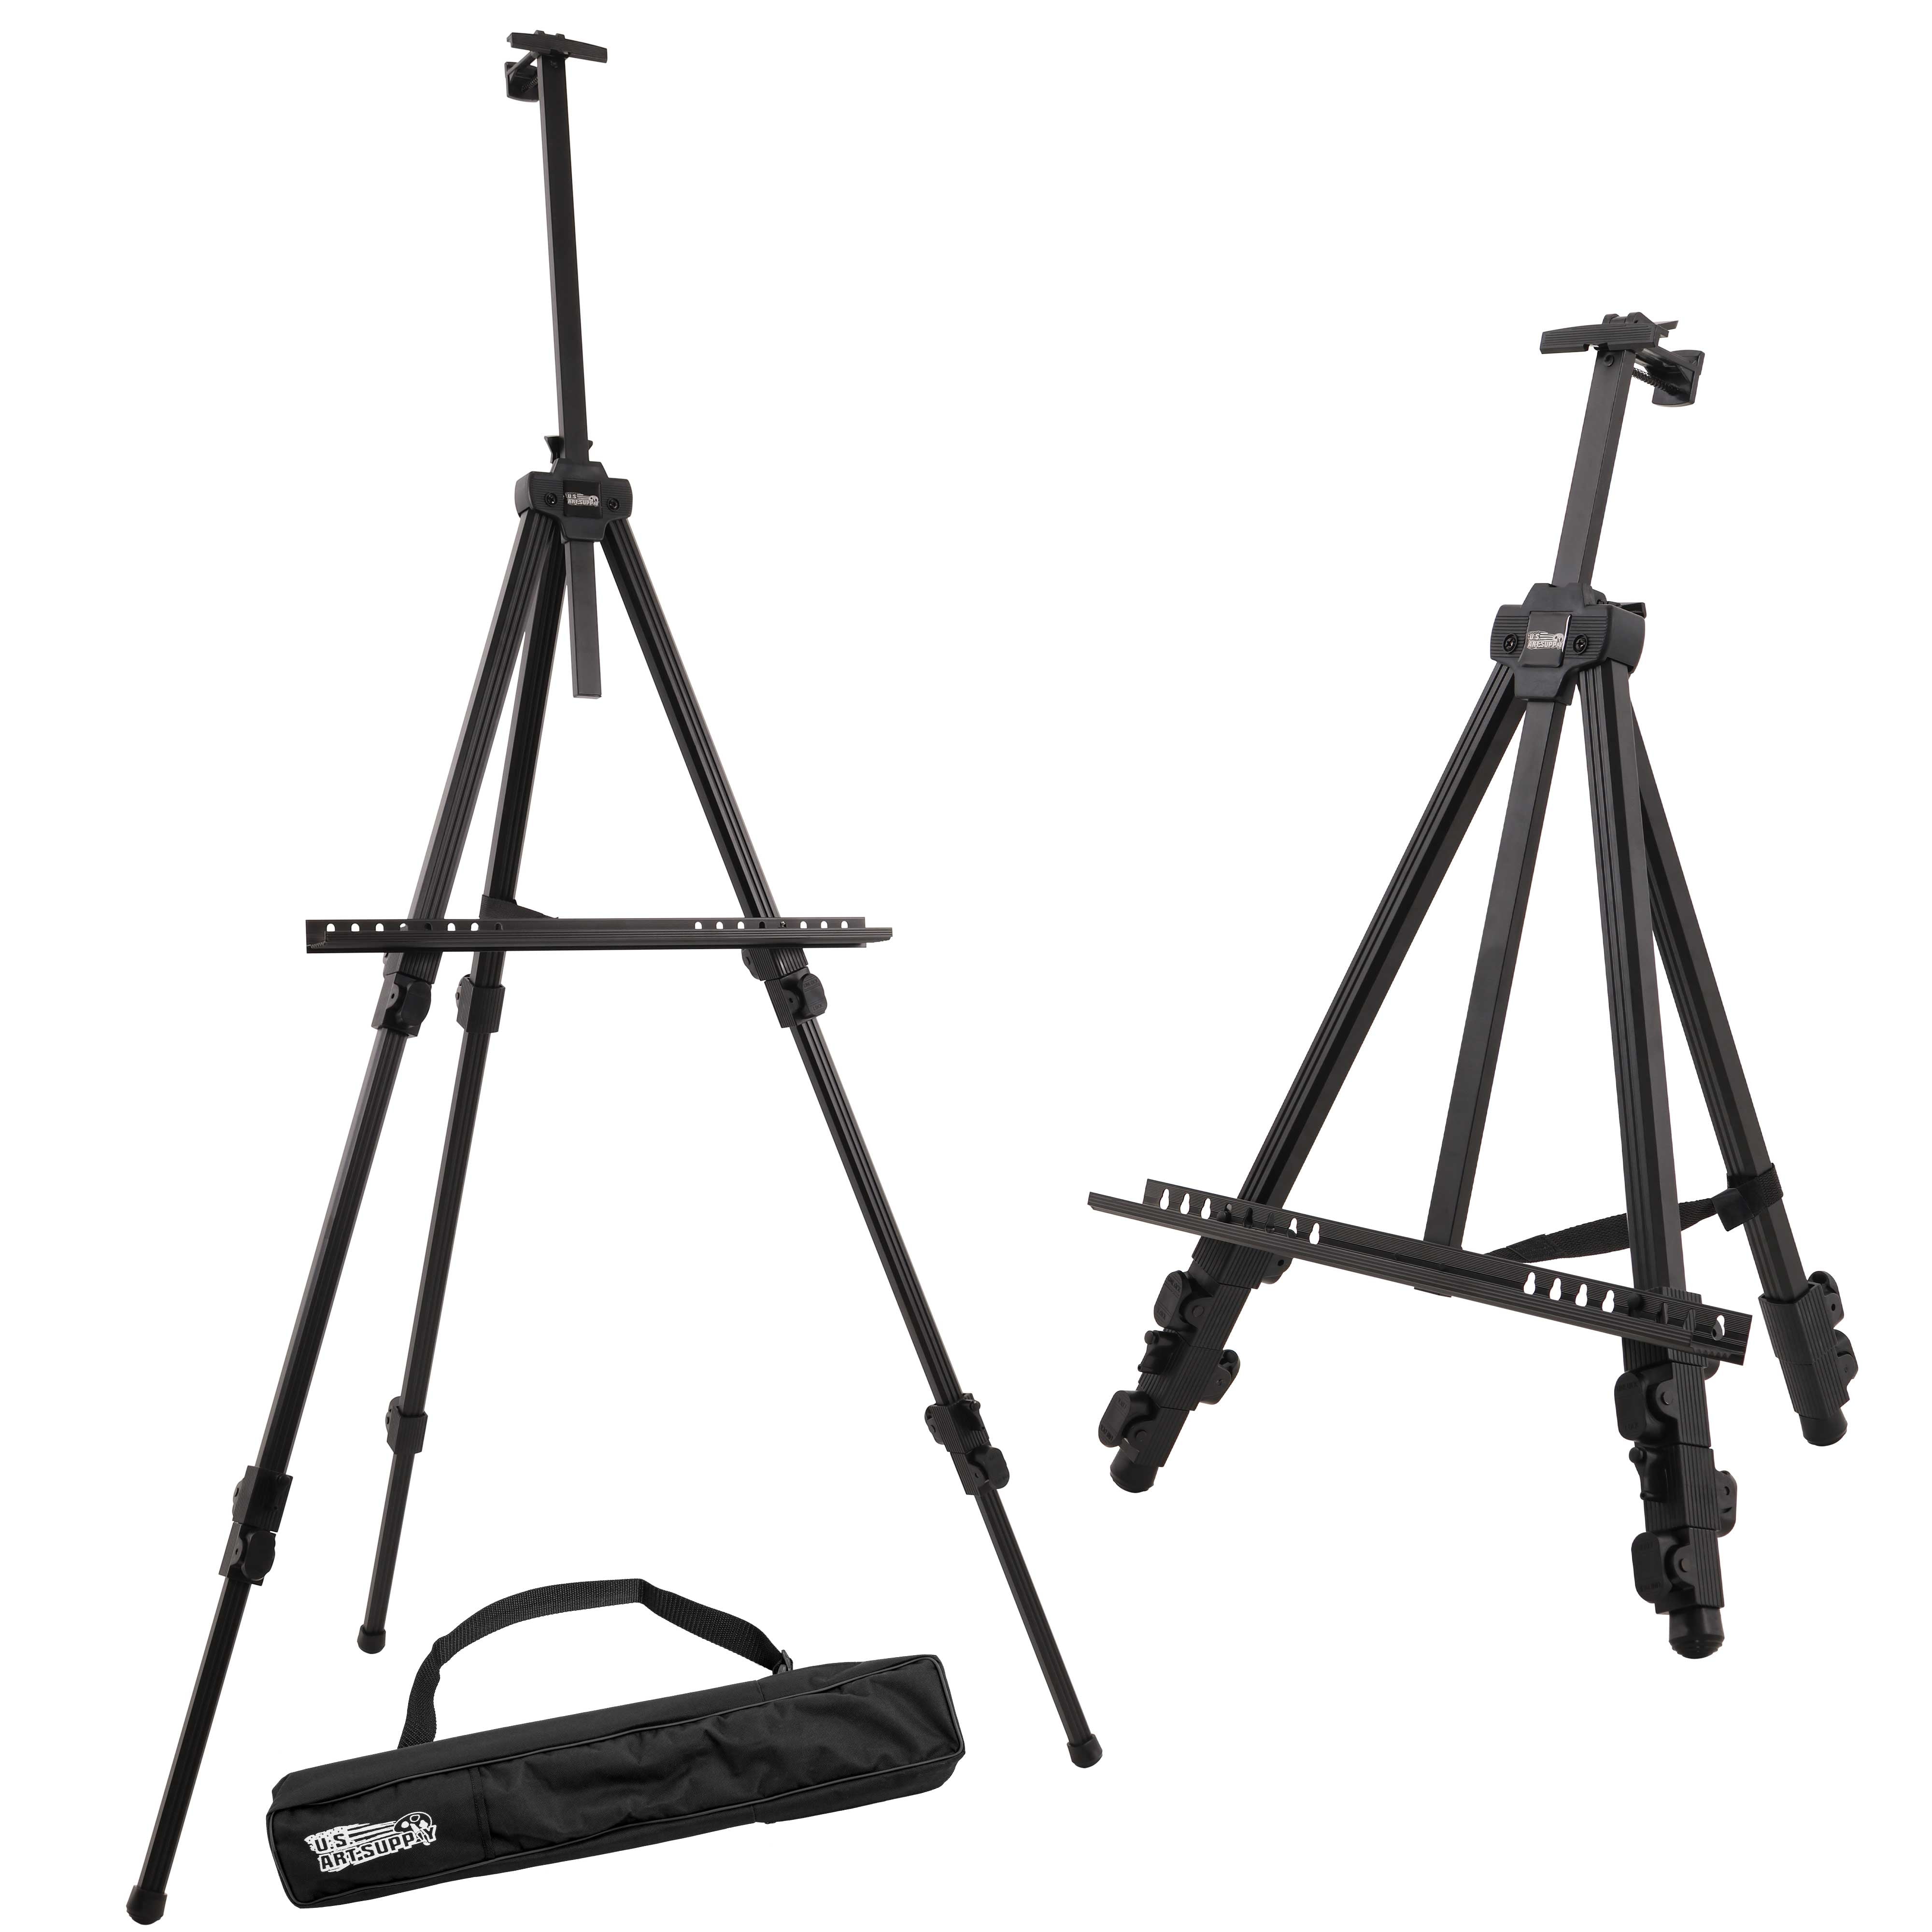 T-Sign 72'' Tall Display Easel Stand Extra Sturdy for Table-Top/Floor Painting Drawing and Display with Bag Black Aluminum Metal Tripod Art Easel Adjustable Height from 22-72”